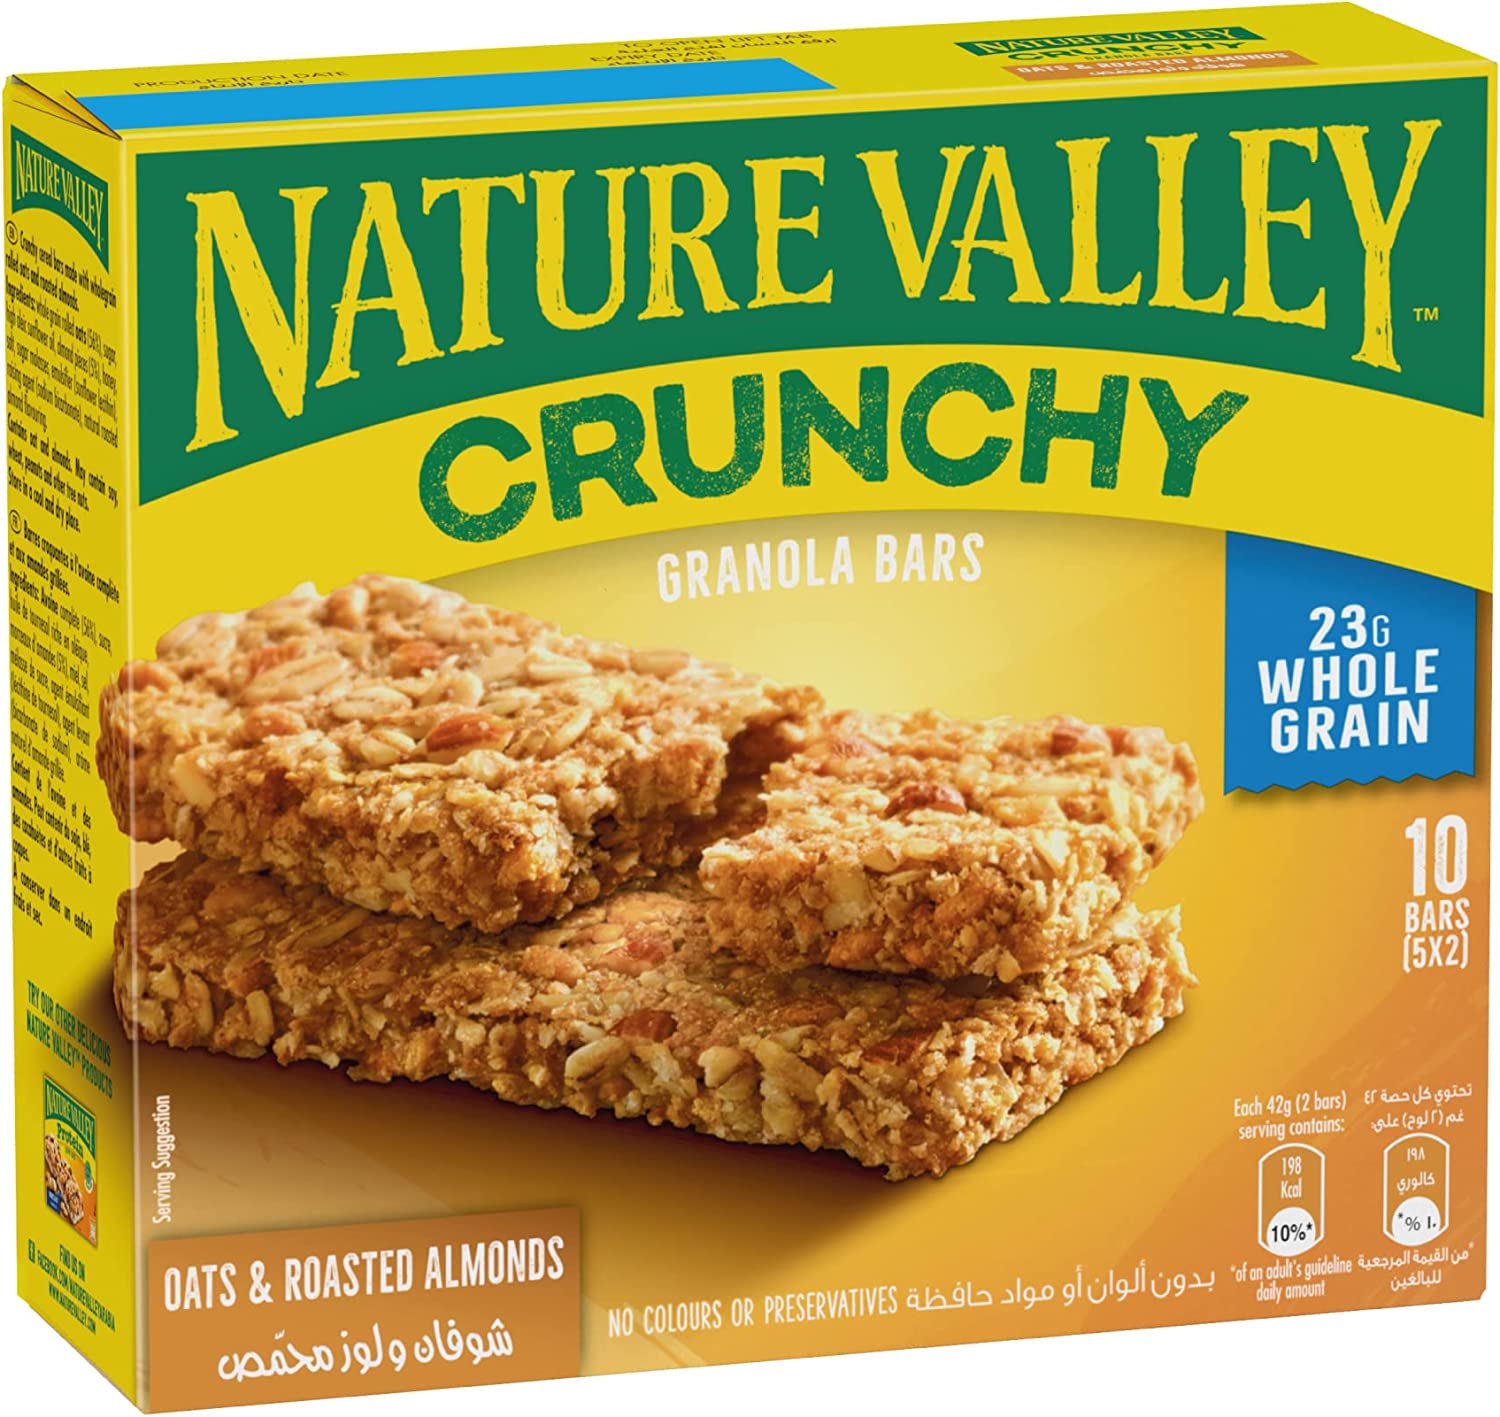 Nature Valley Crunchy Oats and Roasted Almonds 25gr  10 Bars (5x2)  